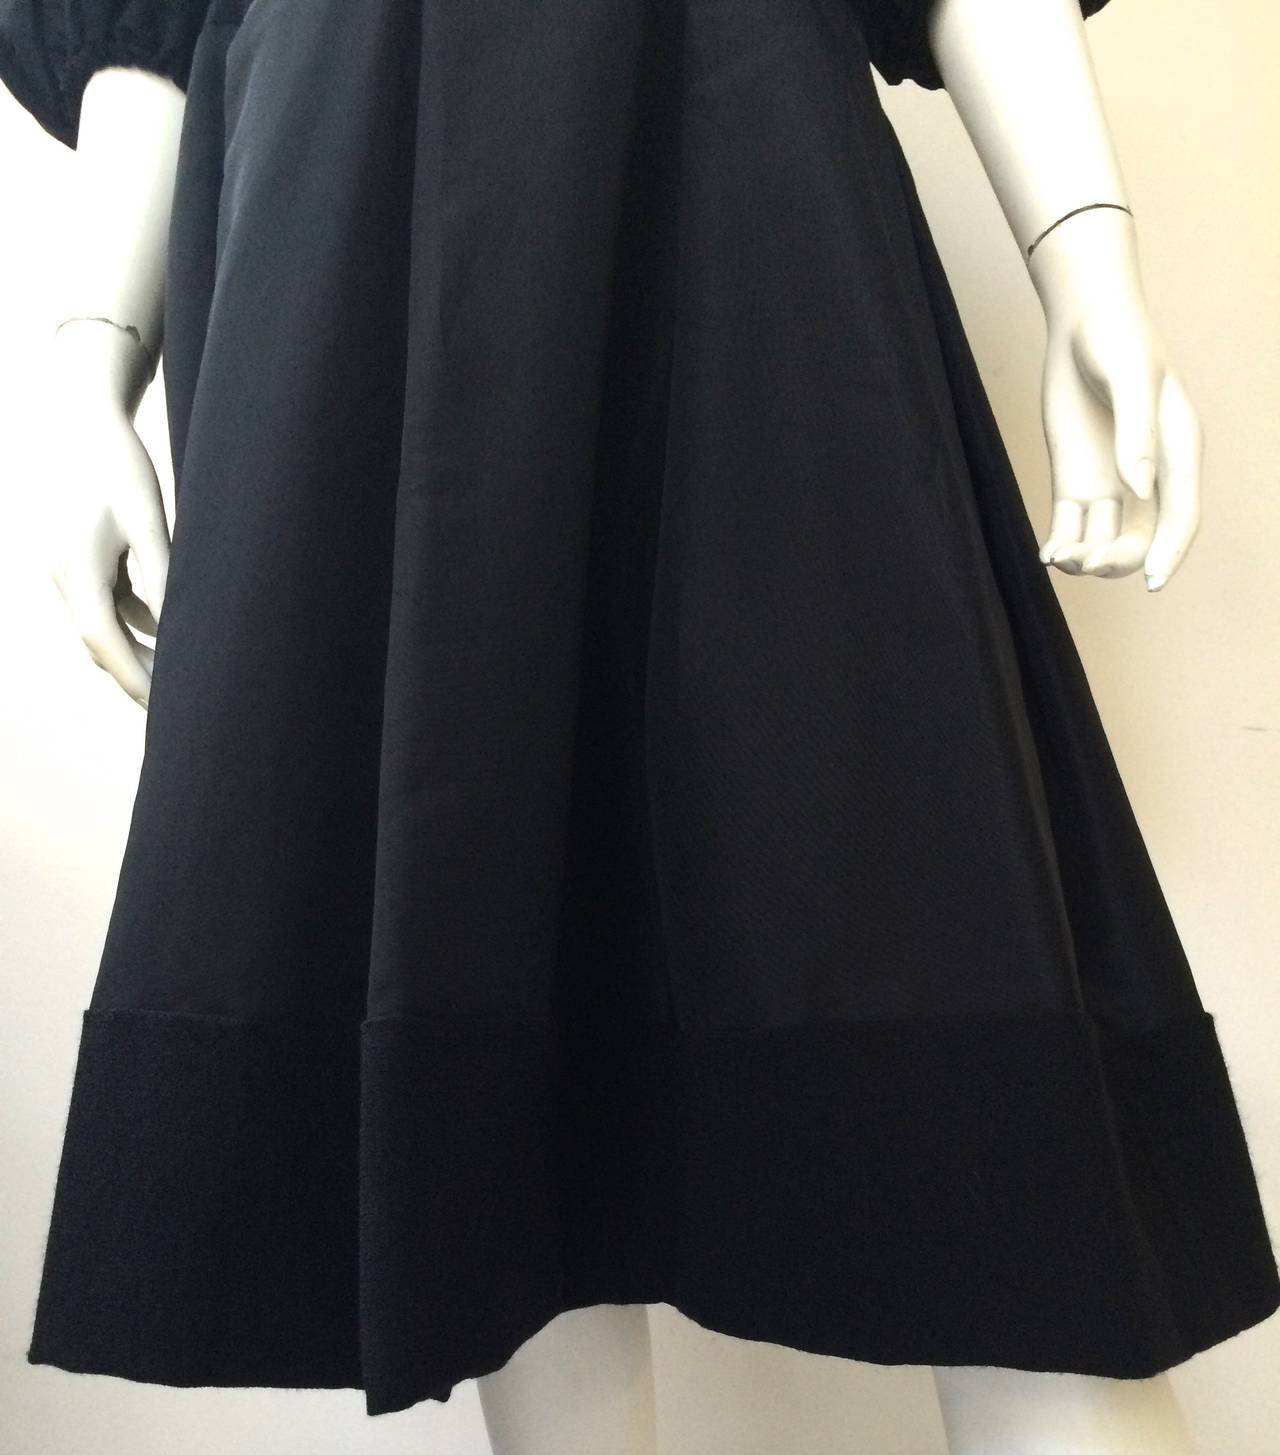 Pauline Trigere 1980s Black Evening Cocktail Dress Size 6/8. In Excellent Condition For Sale In Atlanta, GA